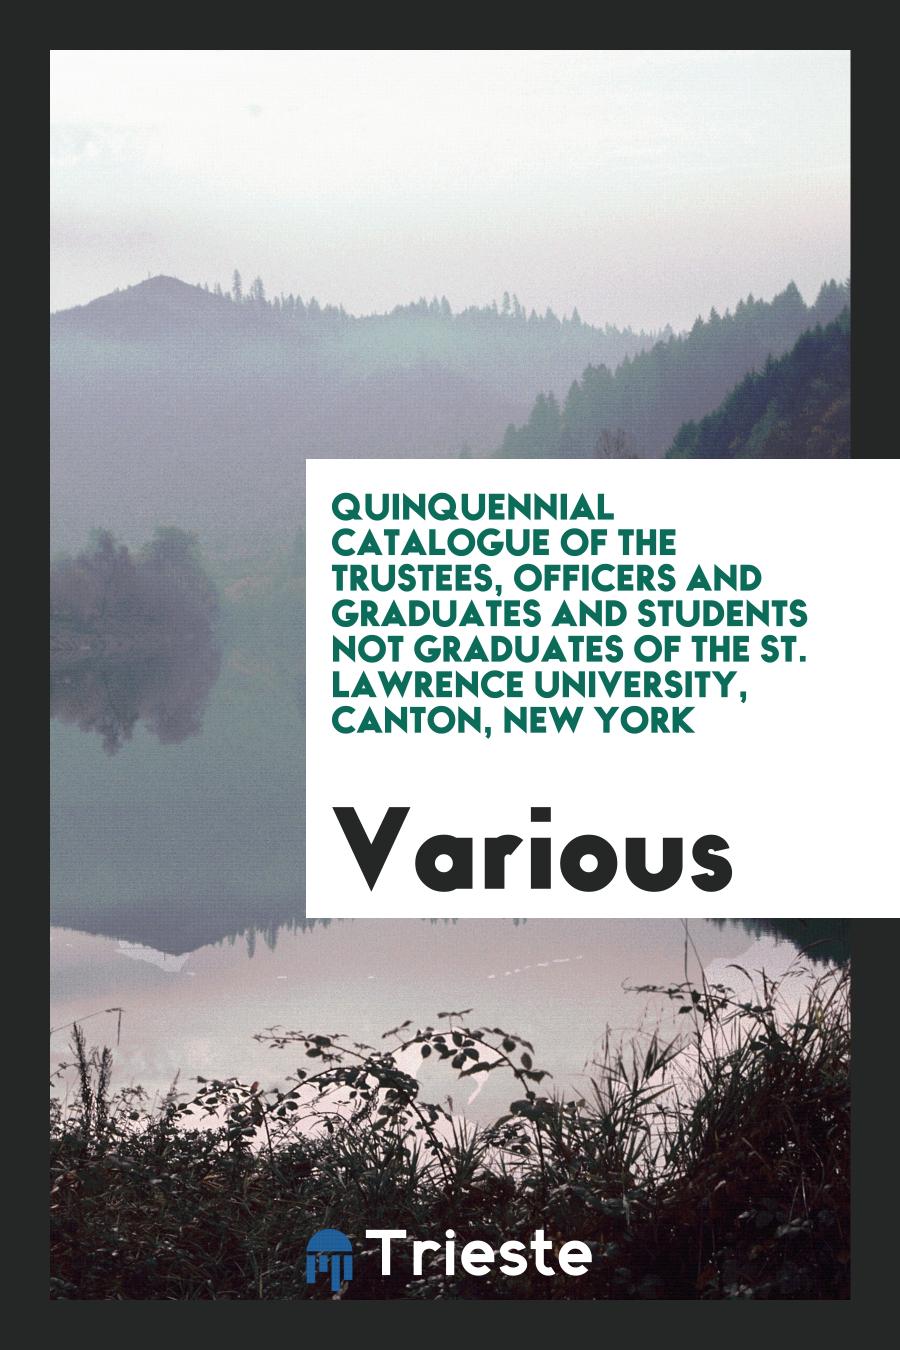 Quinquennial Catalogue of the Trustees, Officers and Graduates and Students Not Graduates of The St. Lawrence University, Canton, New York